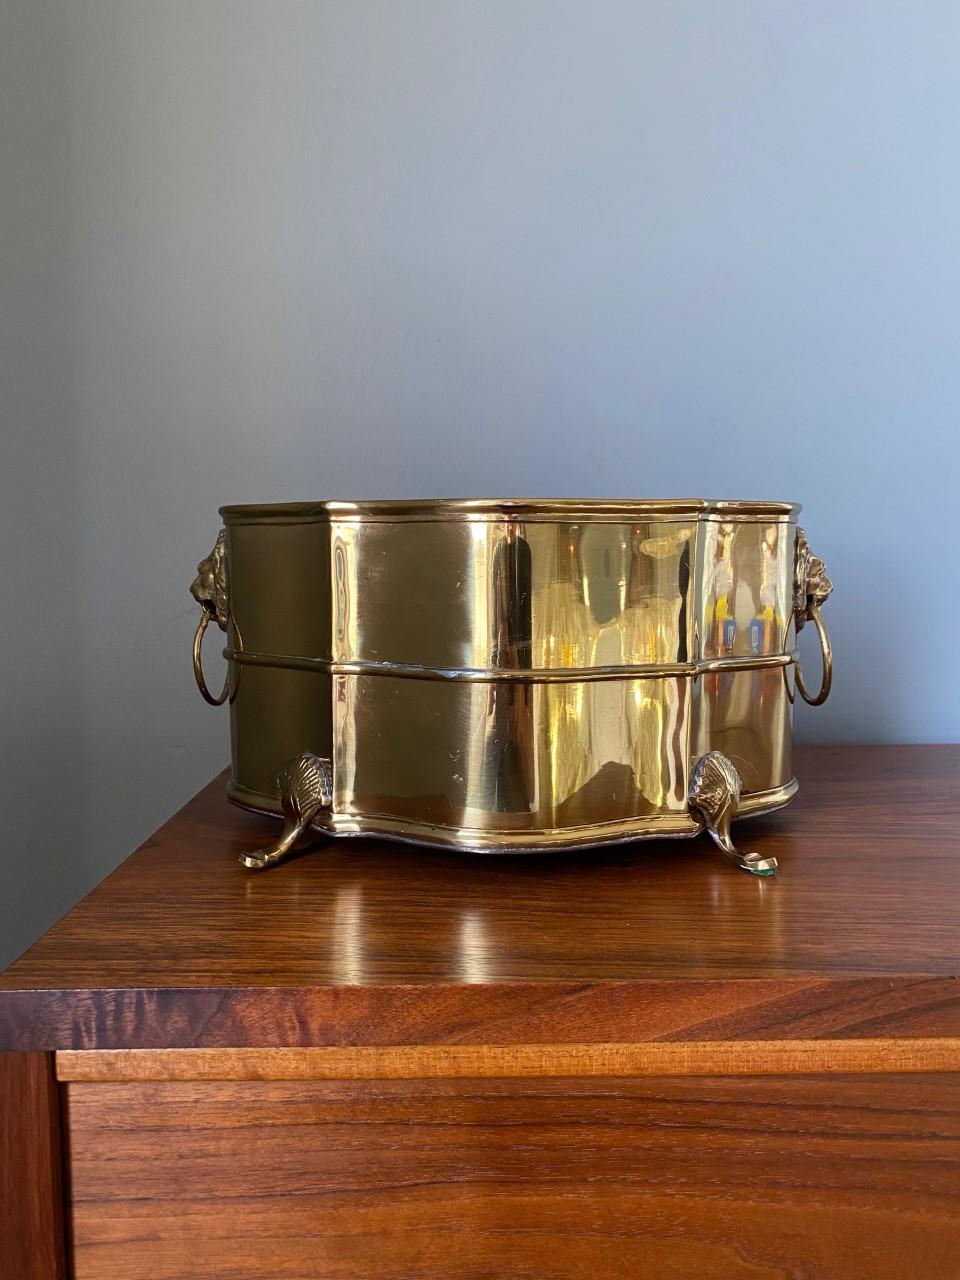 Early 20th Century Antique Brass Jardiniere Planter with Lion Head and Feet Details For Sale